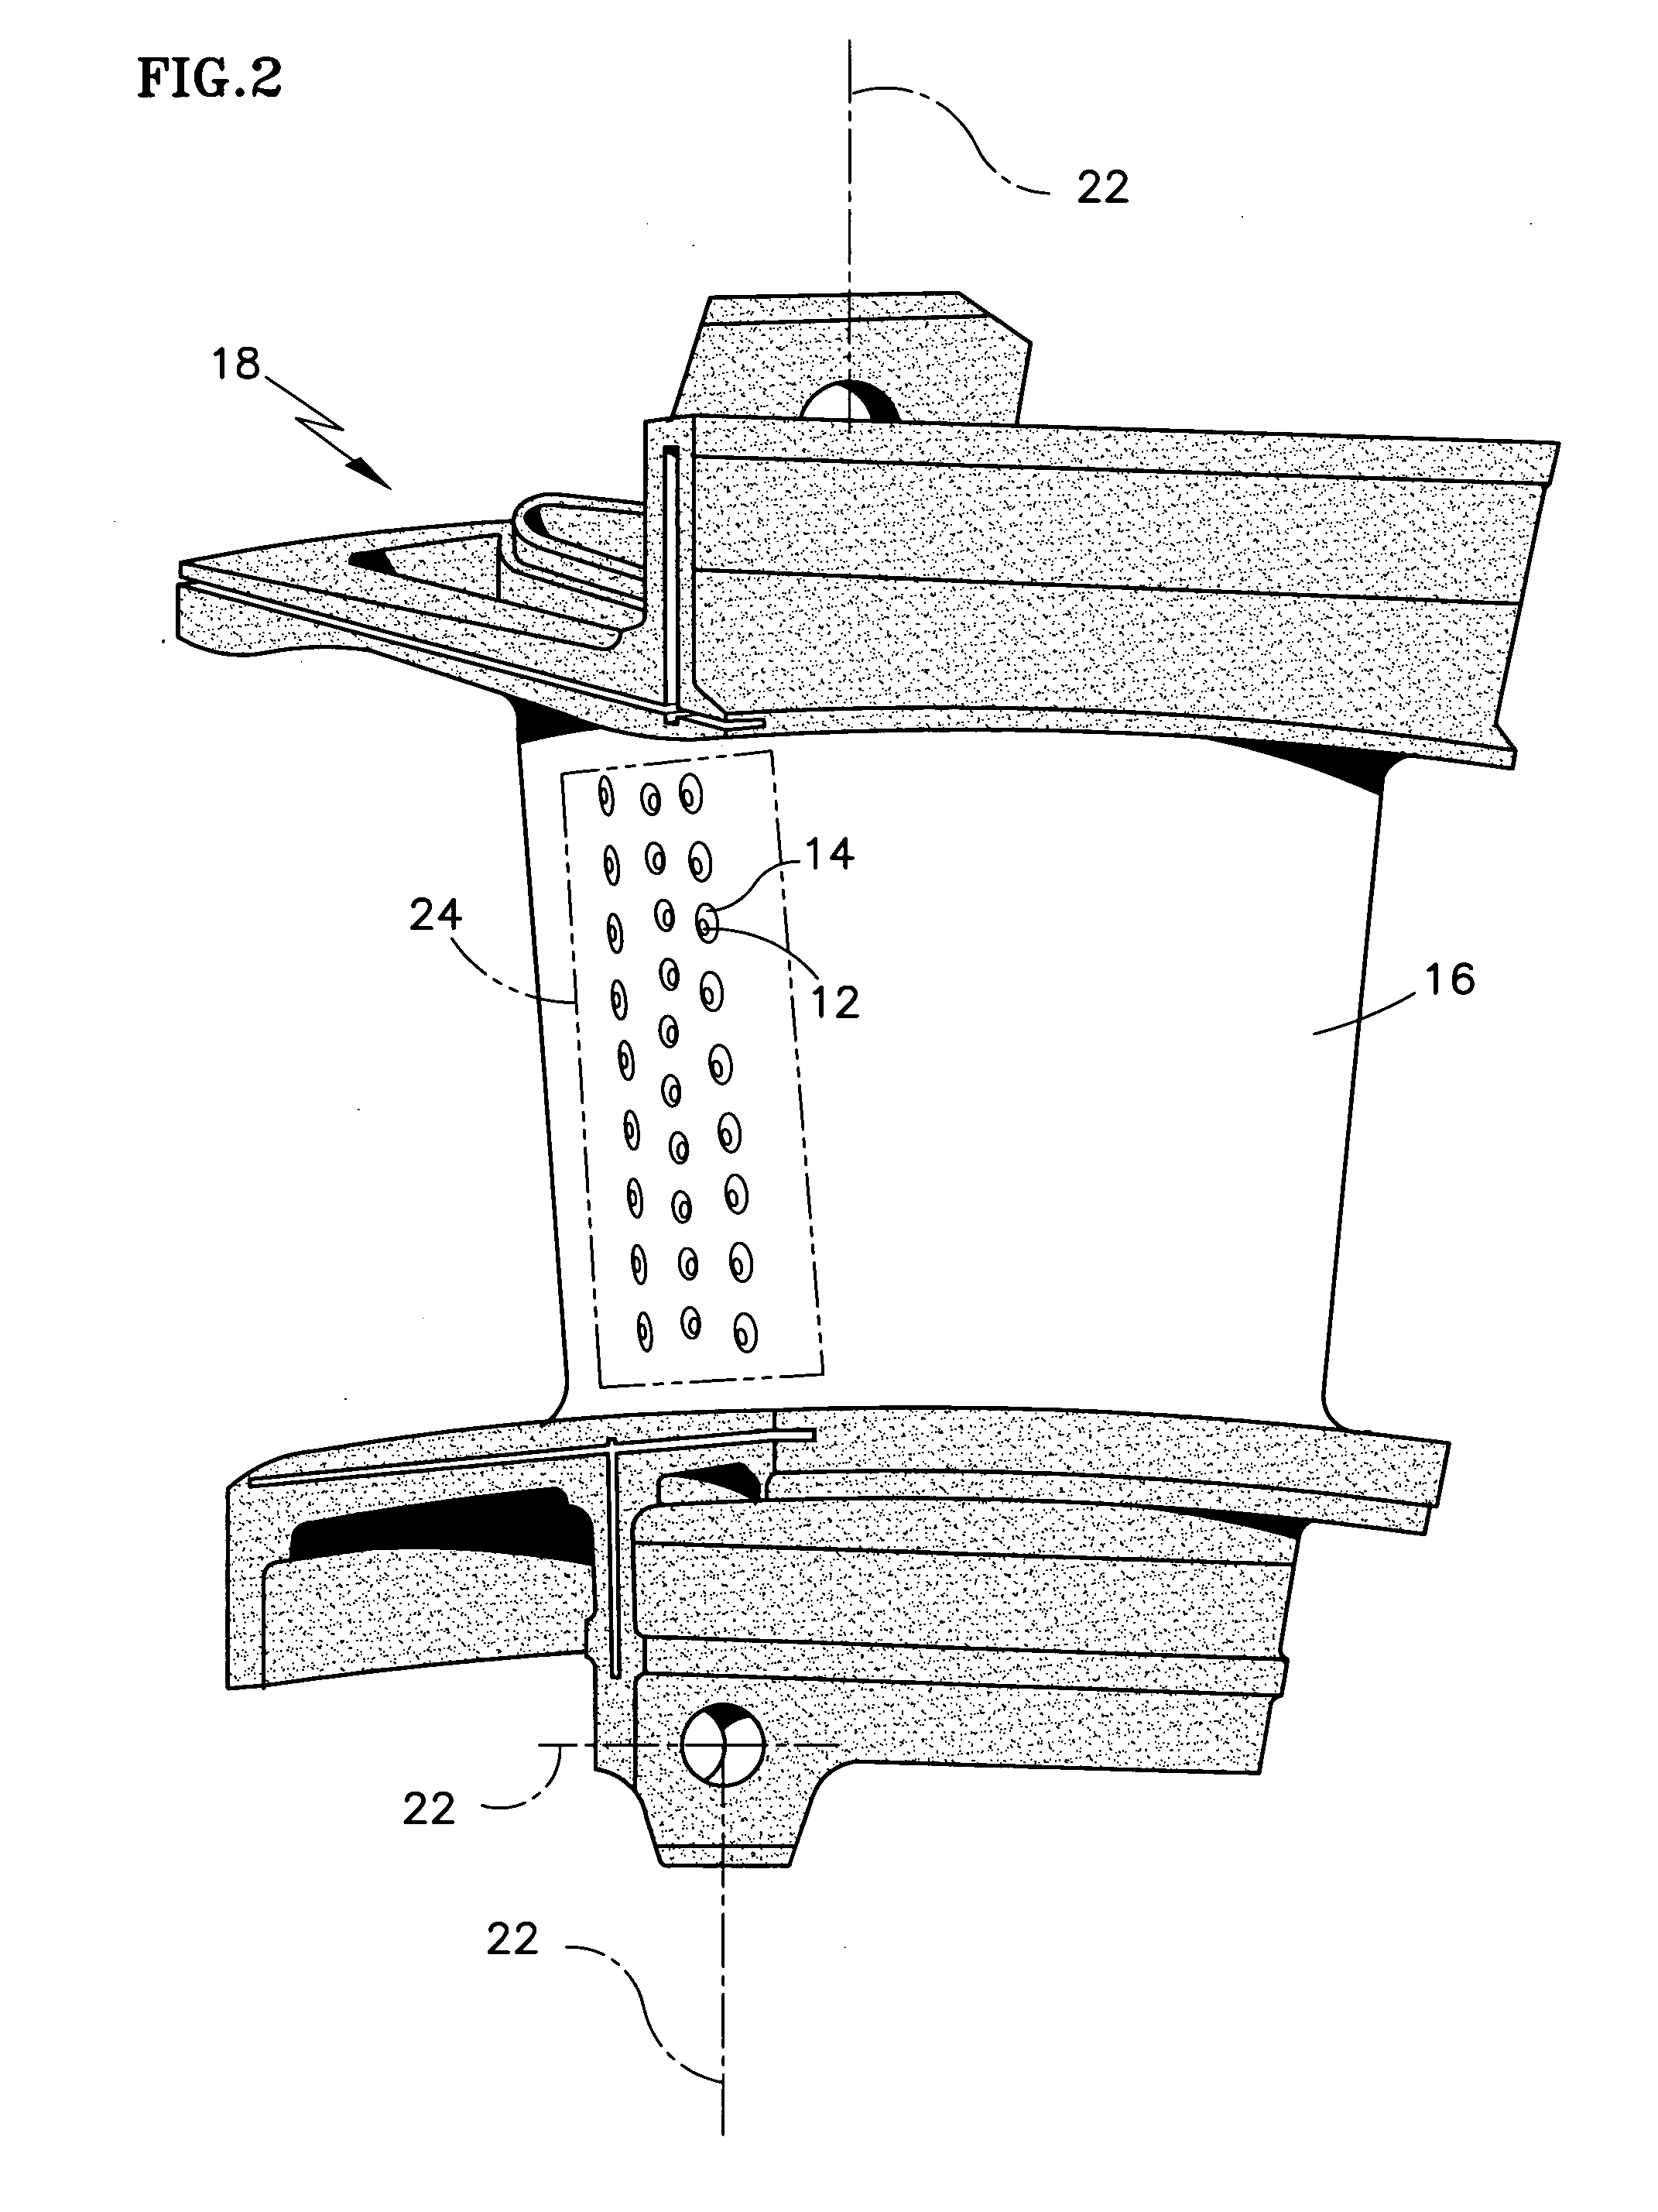 Systems and methods for determining the location and angular orientation of a hole with an obstructed opening residing on a surface of an article